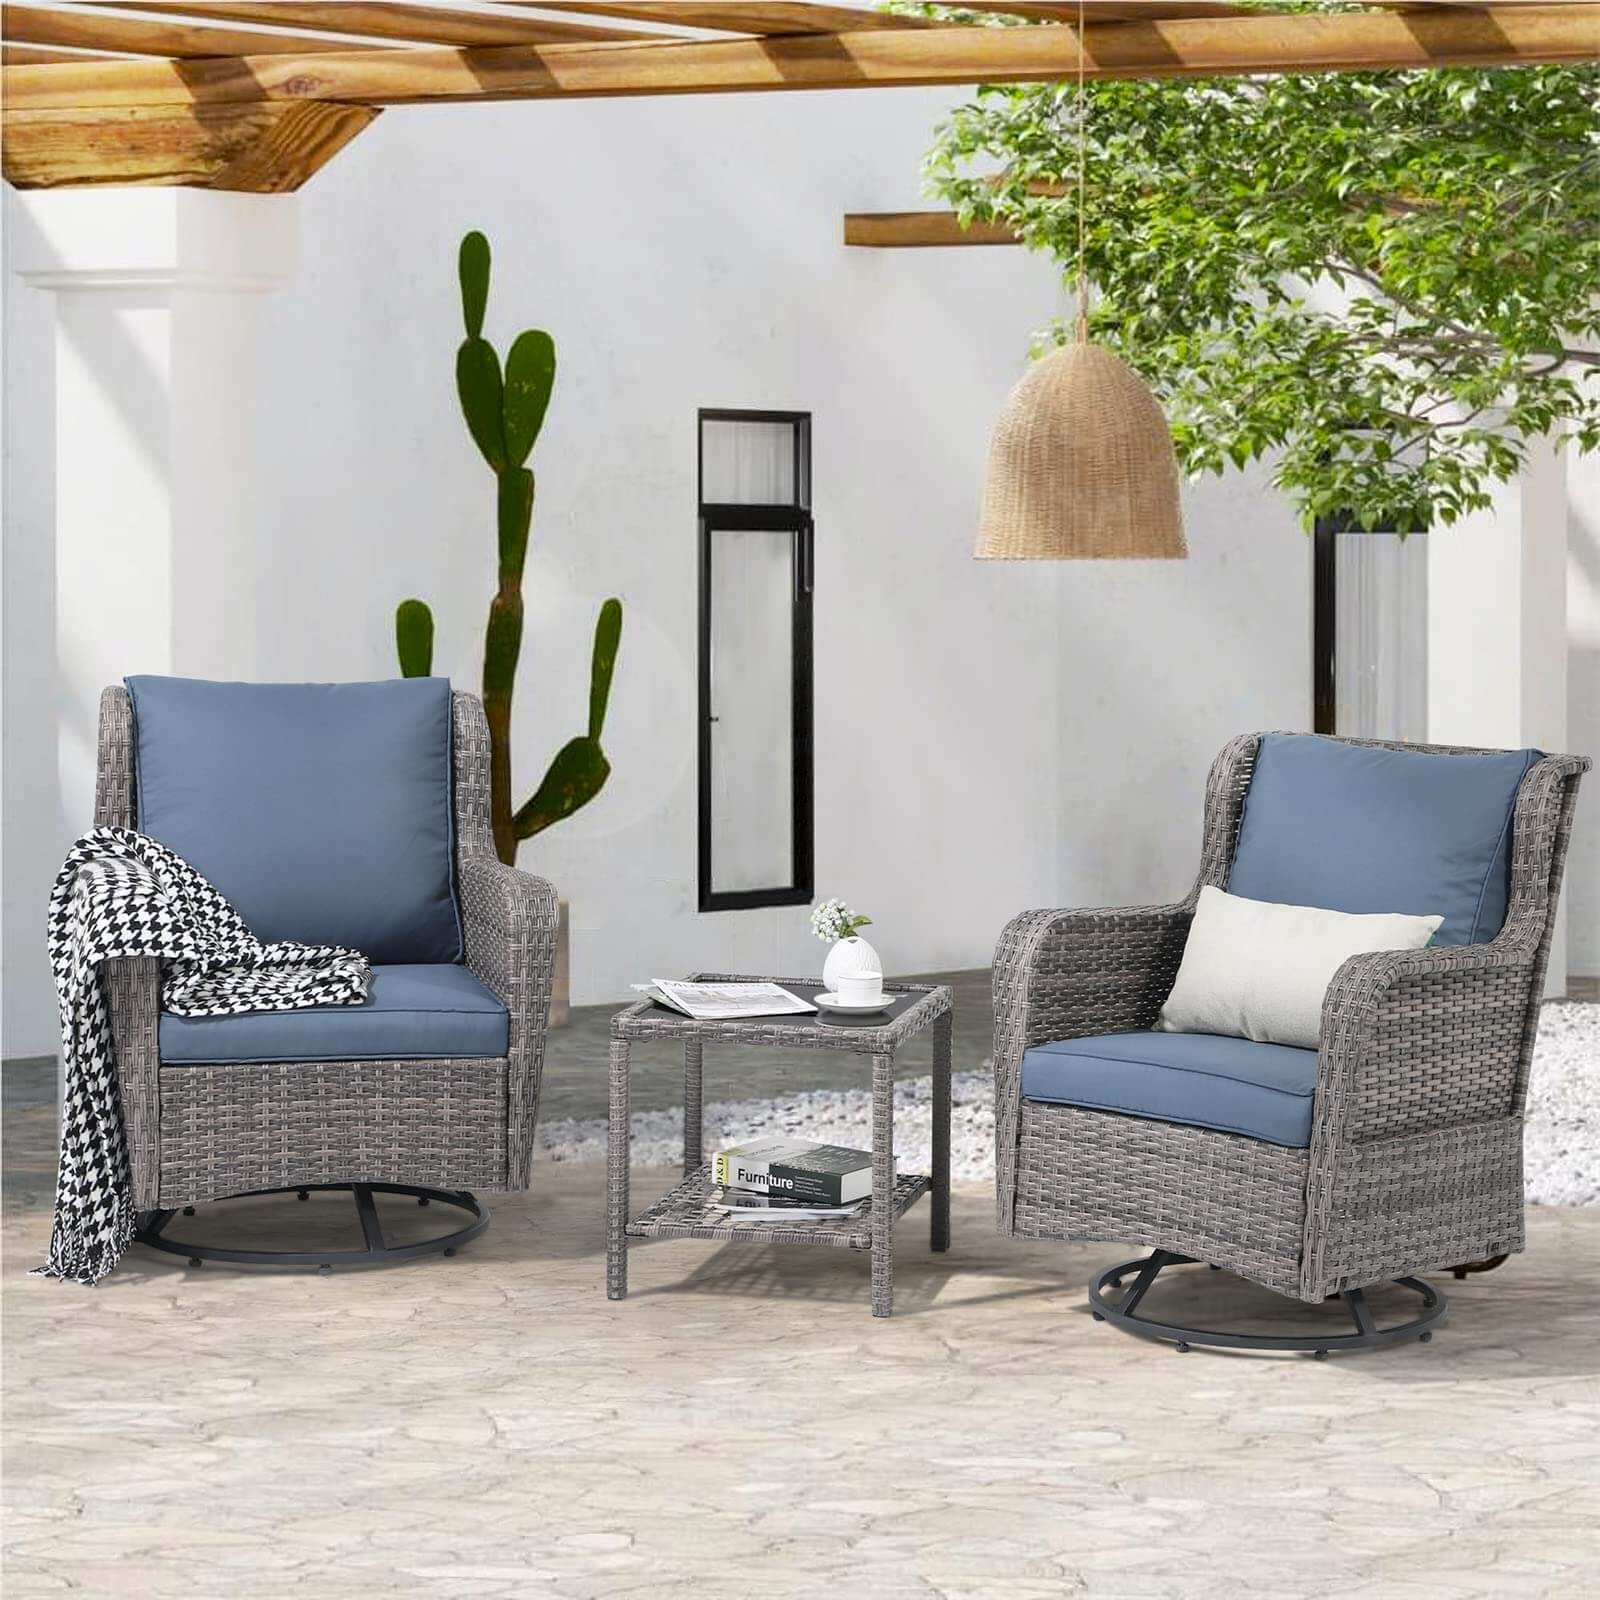 3 Pieces Patio Bistro Set with Swivel Rocking Chairs and Side Table, Outdoor Wicker Swivel Rocker Chairs Set